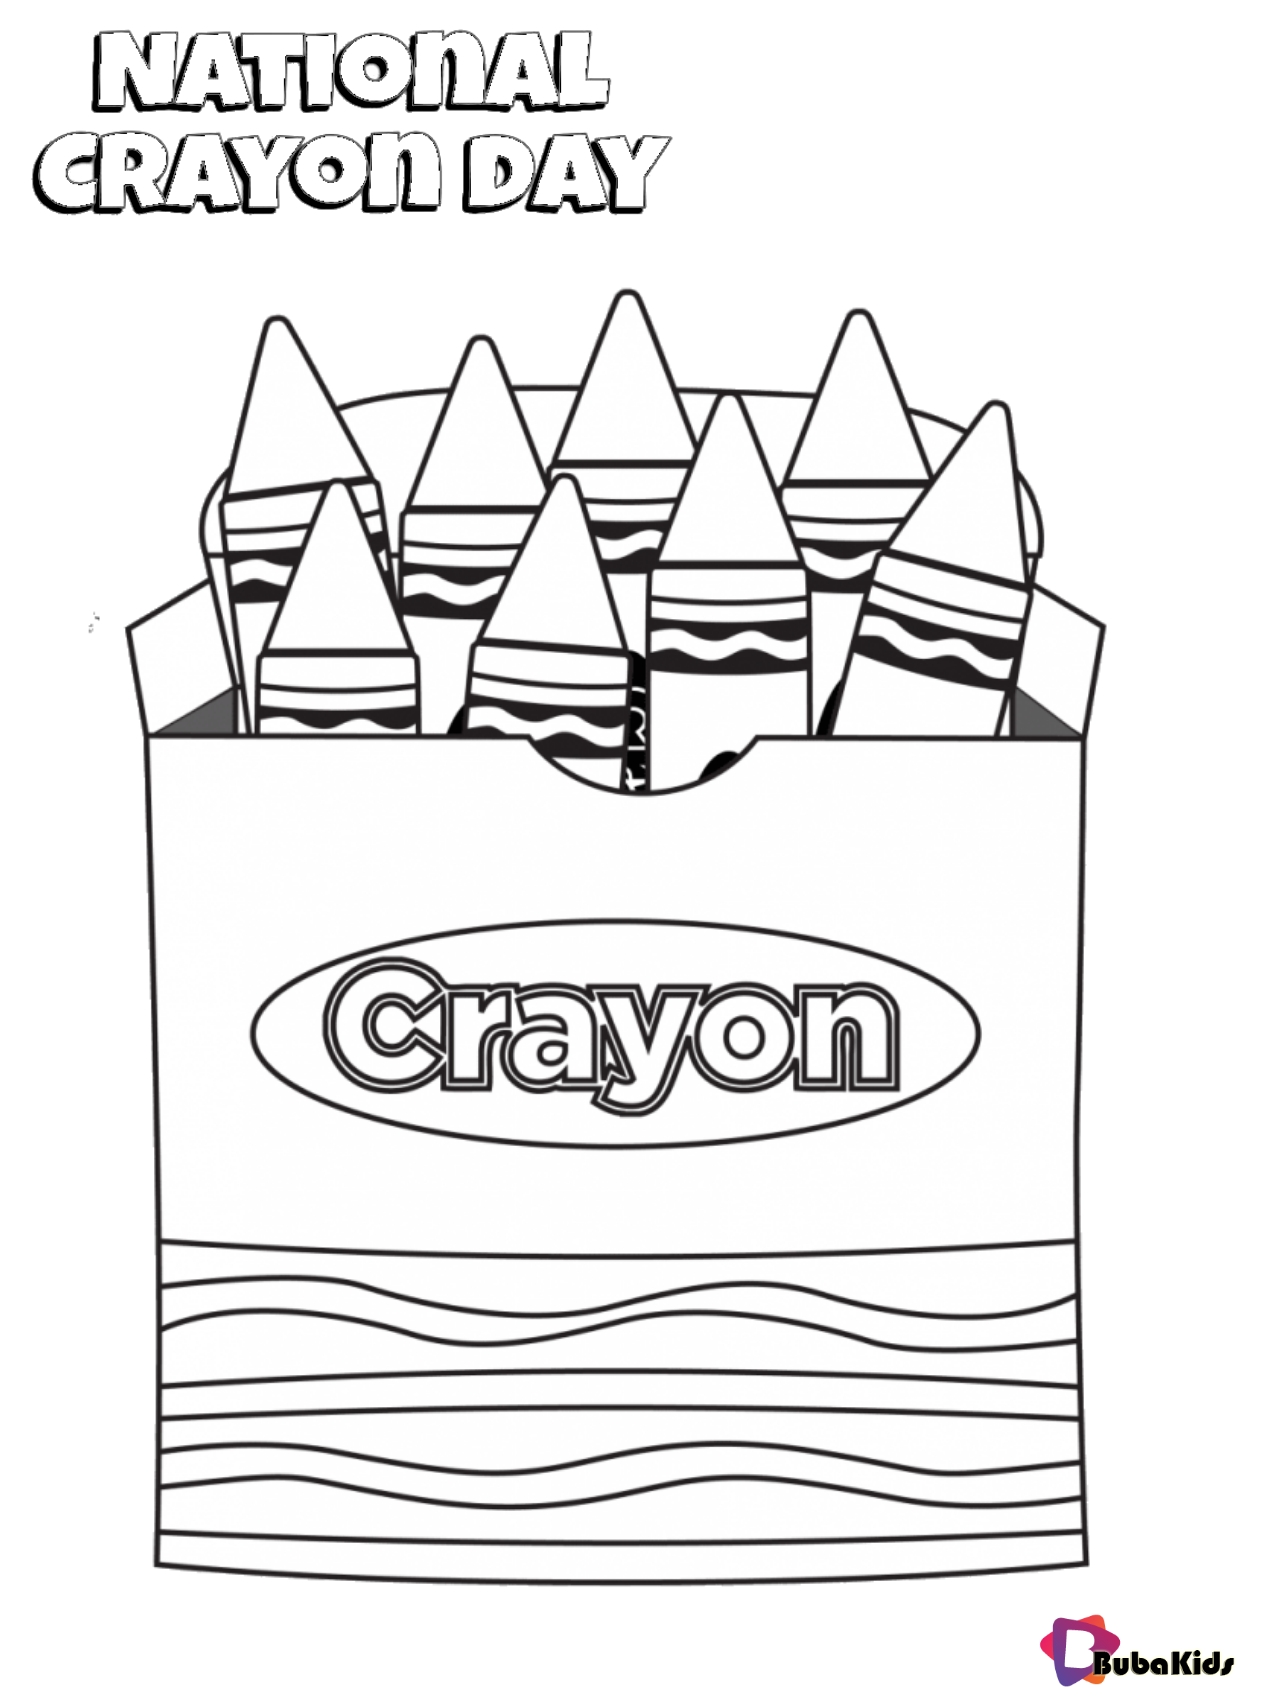 National crayon day on march 31 coloring page Wallpaper